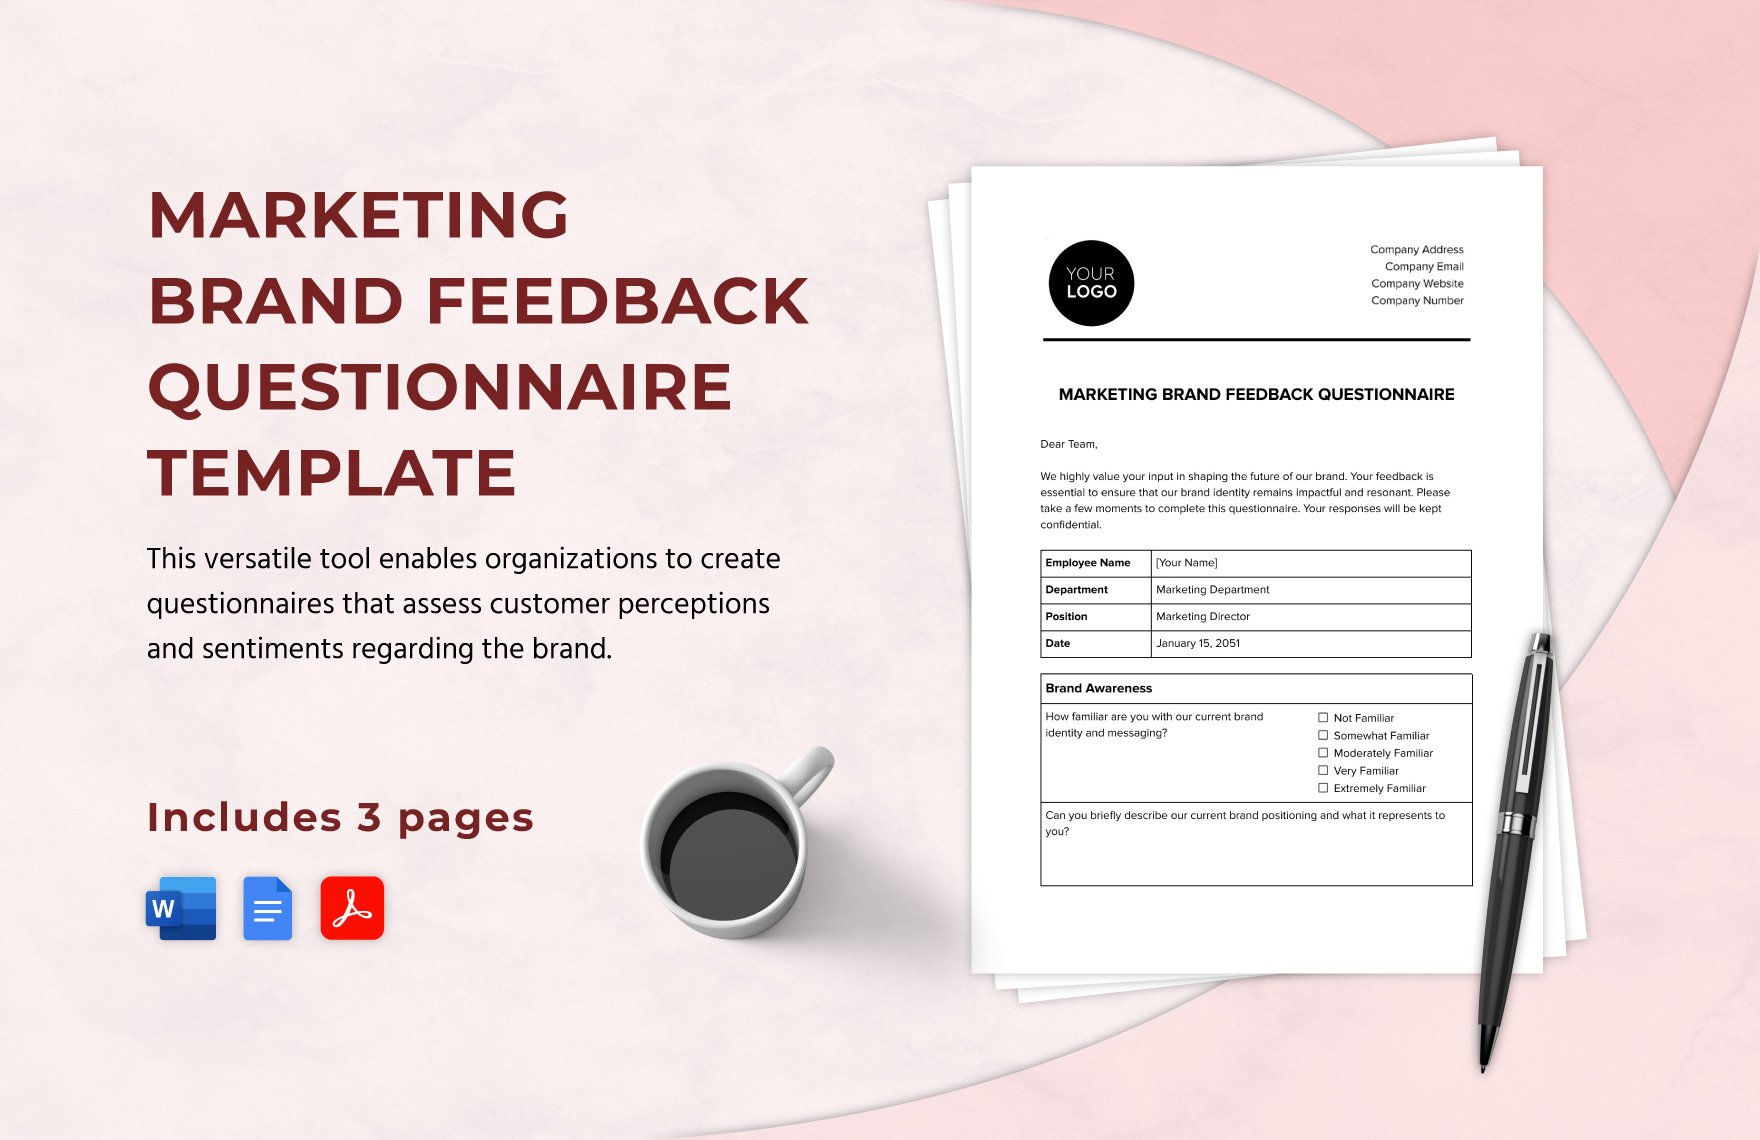 Marketing Brand Feedback Questionnaire Template in Word, Google Docs, PDF